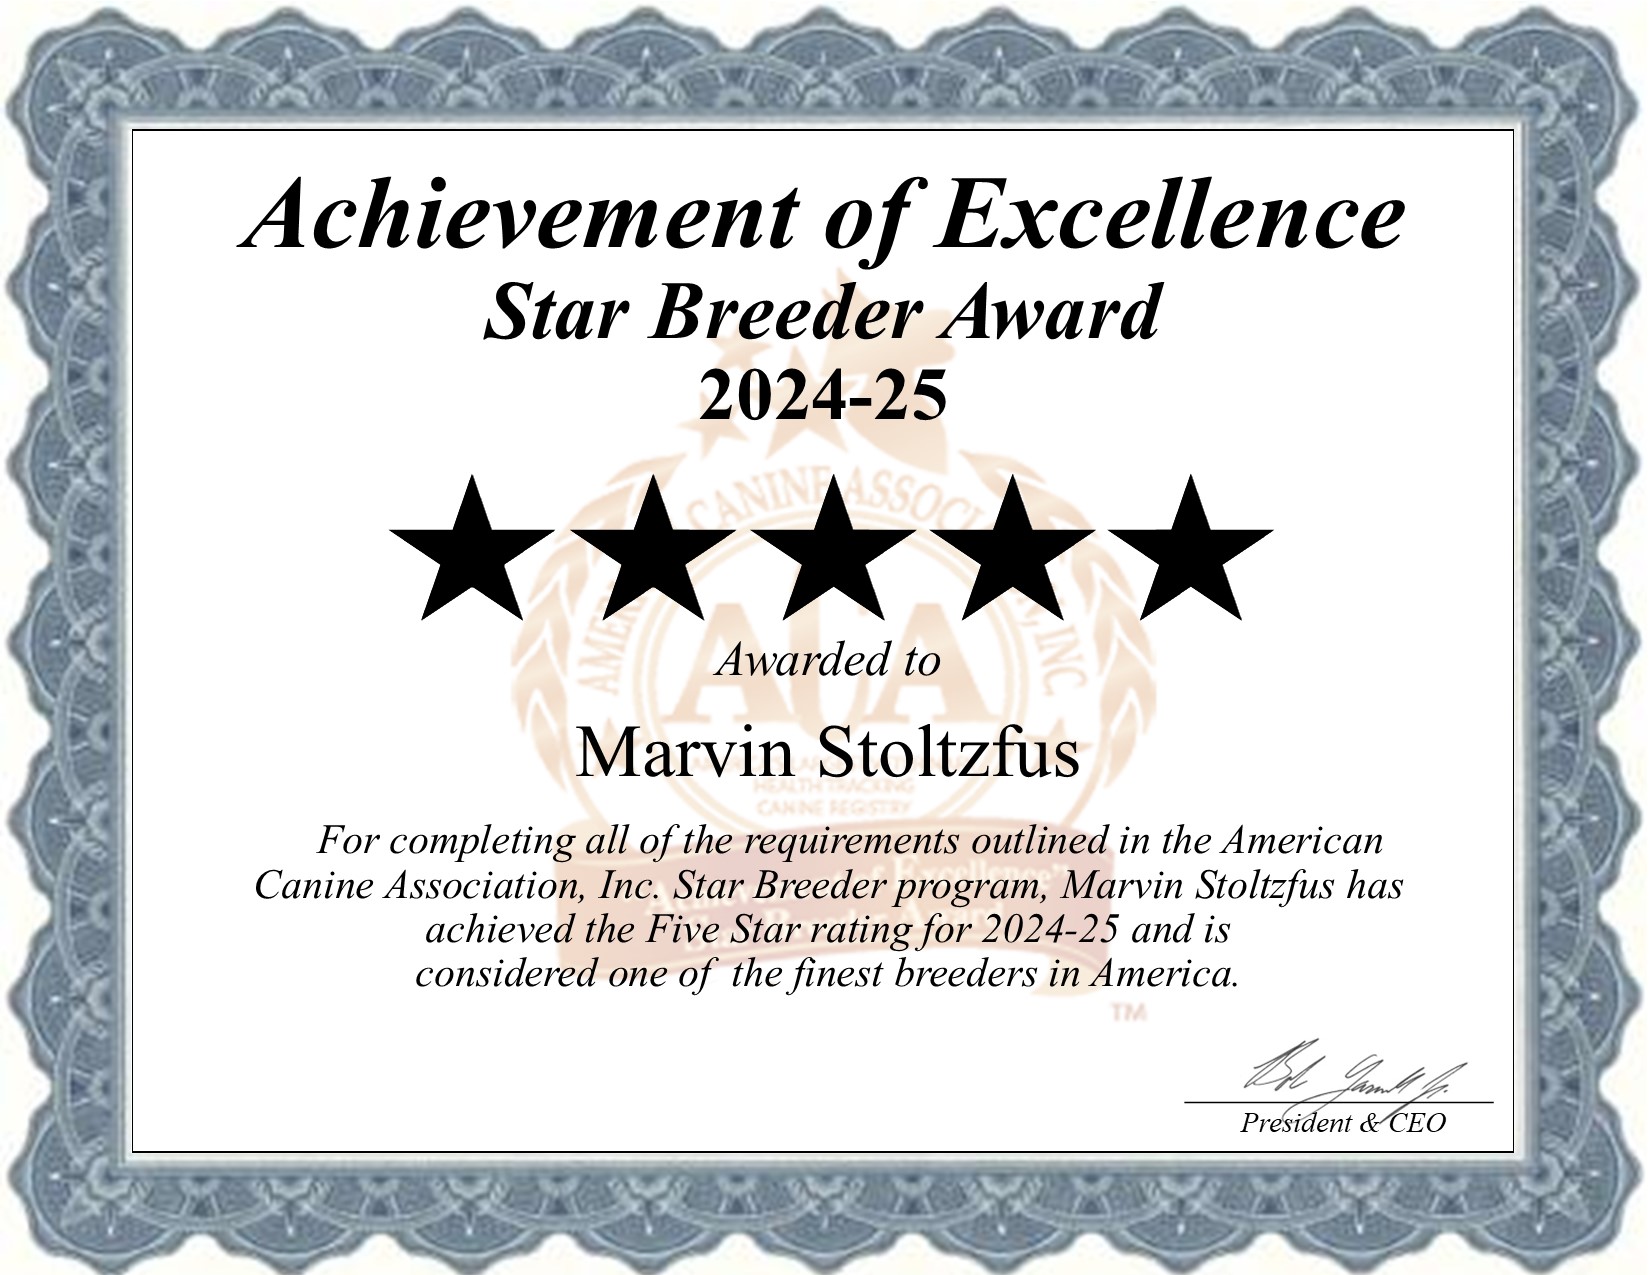 Marvin, Stoltzfus, dog, breeder, star, certificate, Marvin-Stoltzfus, Maple Grove, PA, Pennsylvania, puppy, dog, kennels, mill, puppymill, usda, 5-star, aca, ica, registered, Cavalier King Charles Spaniel, pa-doglaw